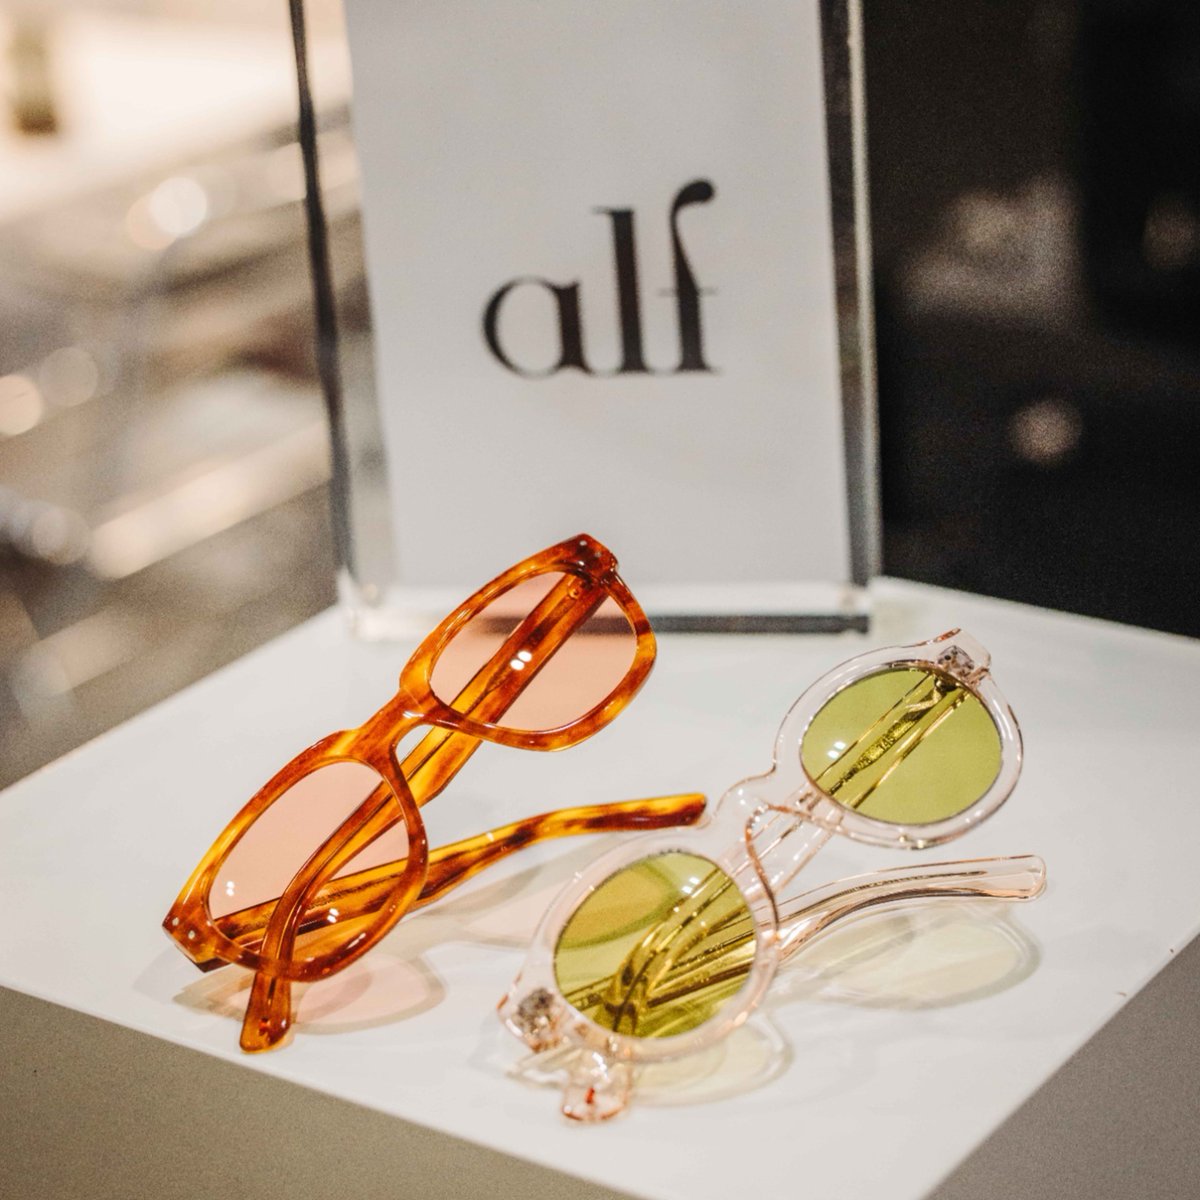 Did you catch Lunettes Alf on the Curoptica stand in the 100% Studio? They were presenting their new collection last weekend at 100% Optical, with new acetate and 3 colourways 💛 Save the date for the next #100Optical! 1-3 MARCH 2025